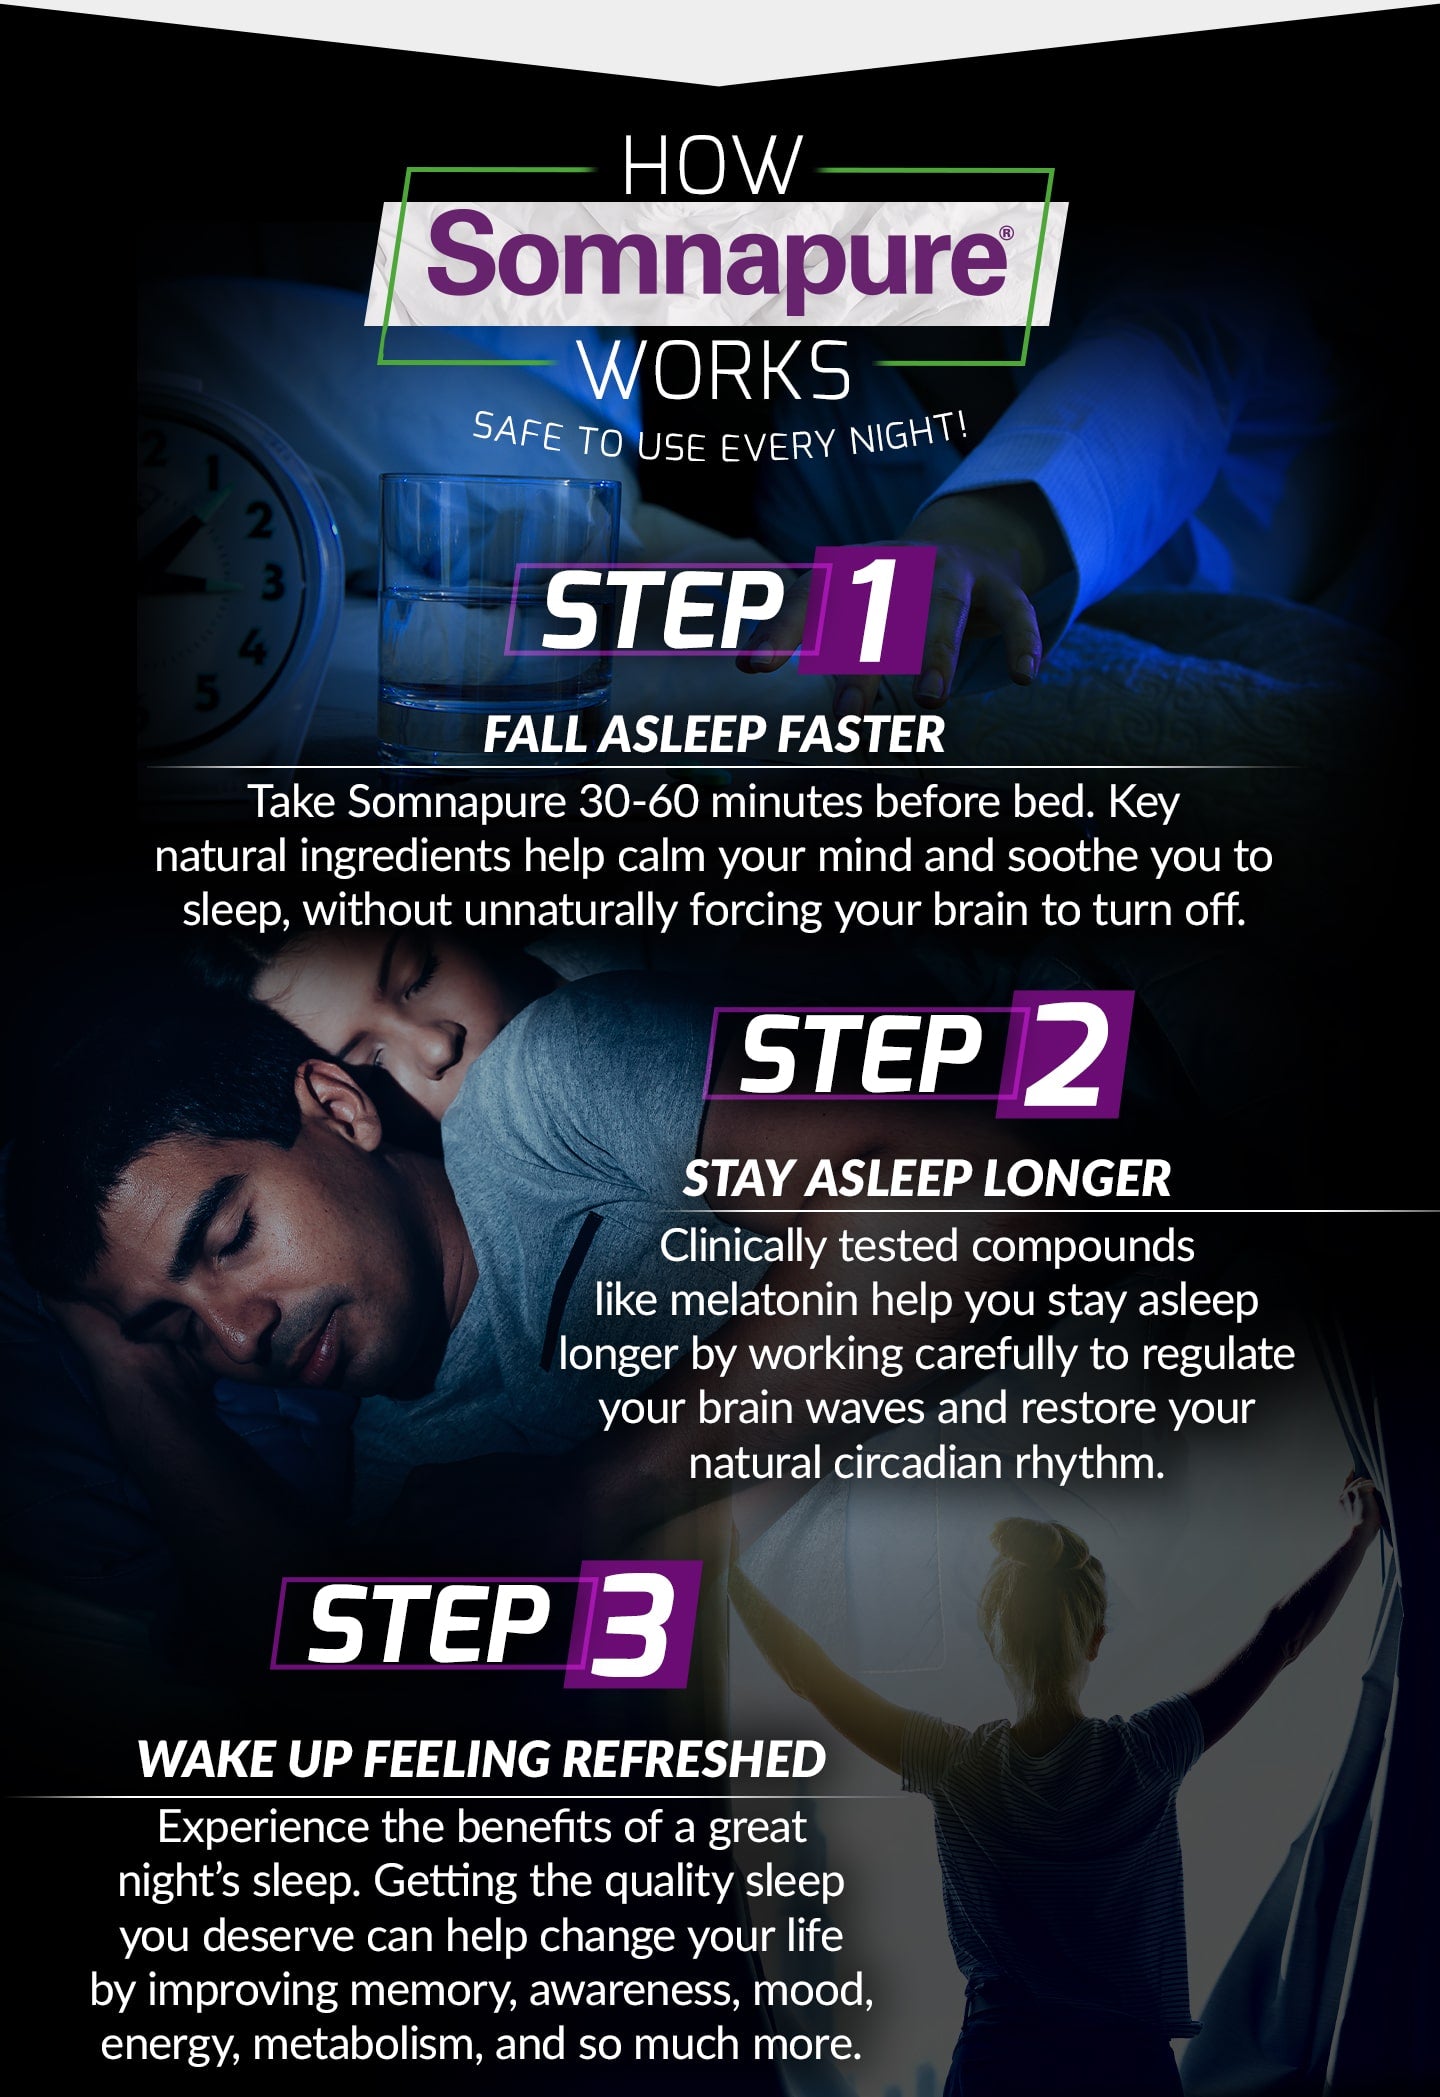 HOW SOMNAPURE WORKS. Safe to use every night! STEP 1: FALL ASLEEP FASTER. Take Somnapure 30-60 minutes before bed. Key natural ingredients help calm your mind and soothe you to sleep, without unnaturally forcing your brain to turn off. STEP 2: STAY ASLEEP LONGER. Clinically tested compounds like melatonin help you stay asleep longer by working carefully to regulate your brain waves and restore your natural circadian rhythm. STEP 3: WAKE UP FEELING REFRESHED. Experience the benefits of a great night’s sleep. Getting the quality sleep you deserve can help change your life by improving memory, awareness, mood, energy, metabolism, and so much more.